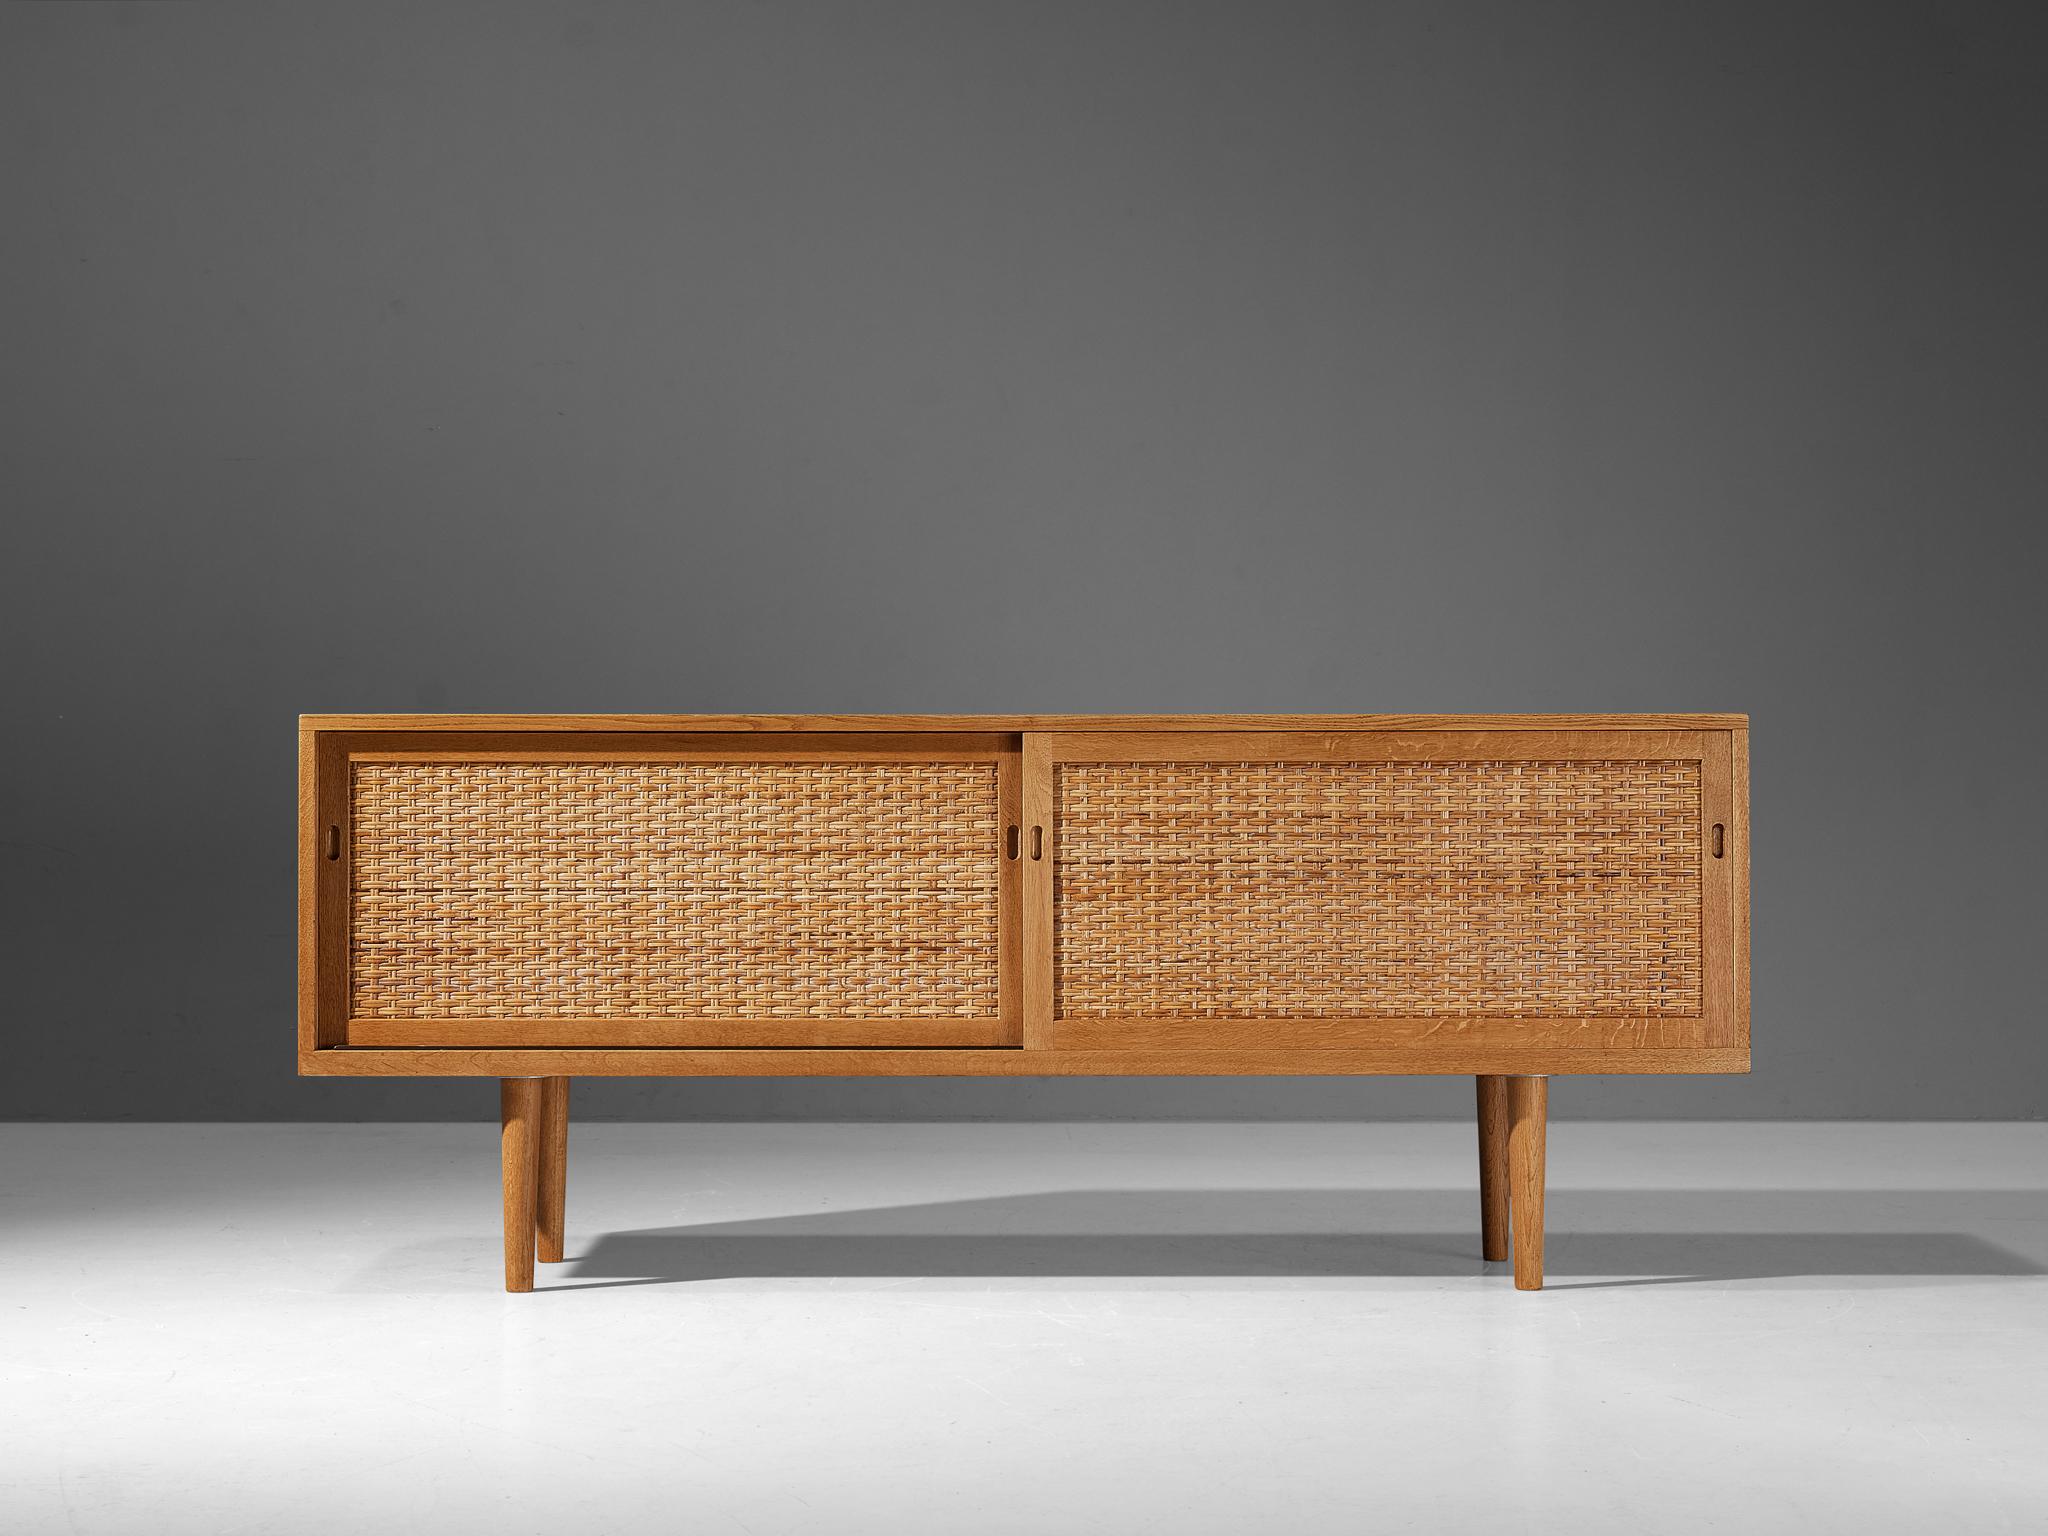 Hans J. Wegner for Ry Møbler, sideboard, oak, cane Denmark, ca. 1960 

A low sideboard that features fine, streamlined forms and is executed with honest, neutral materials. The corpus embodies a rectangular shape with clear lines and right-angled